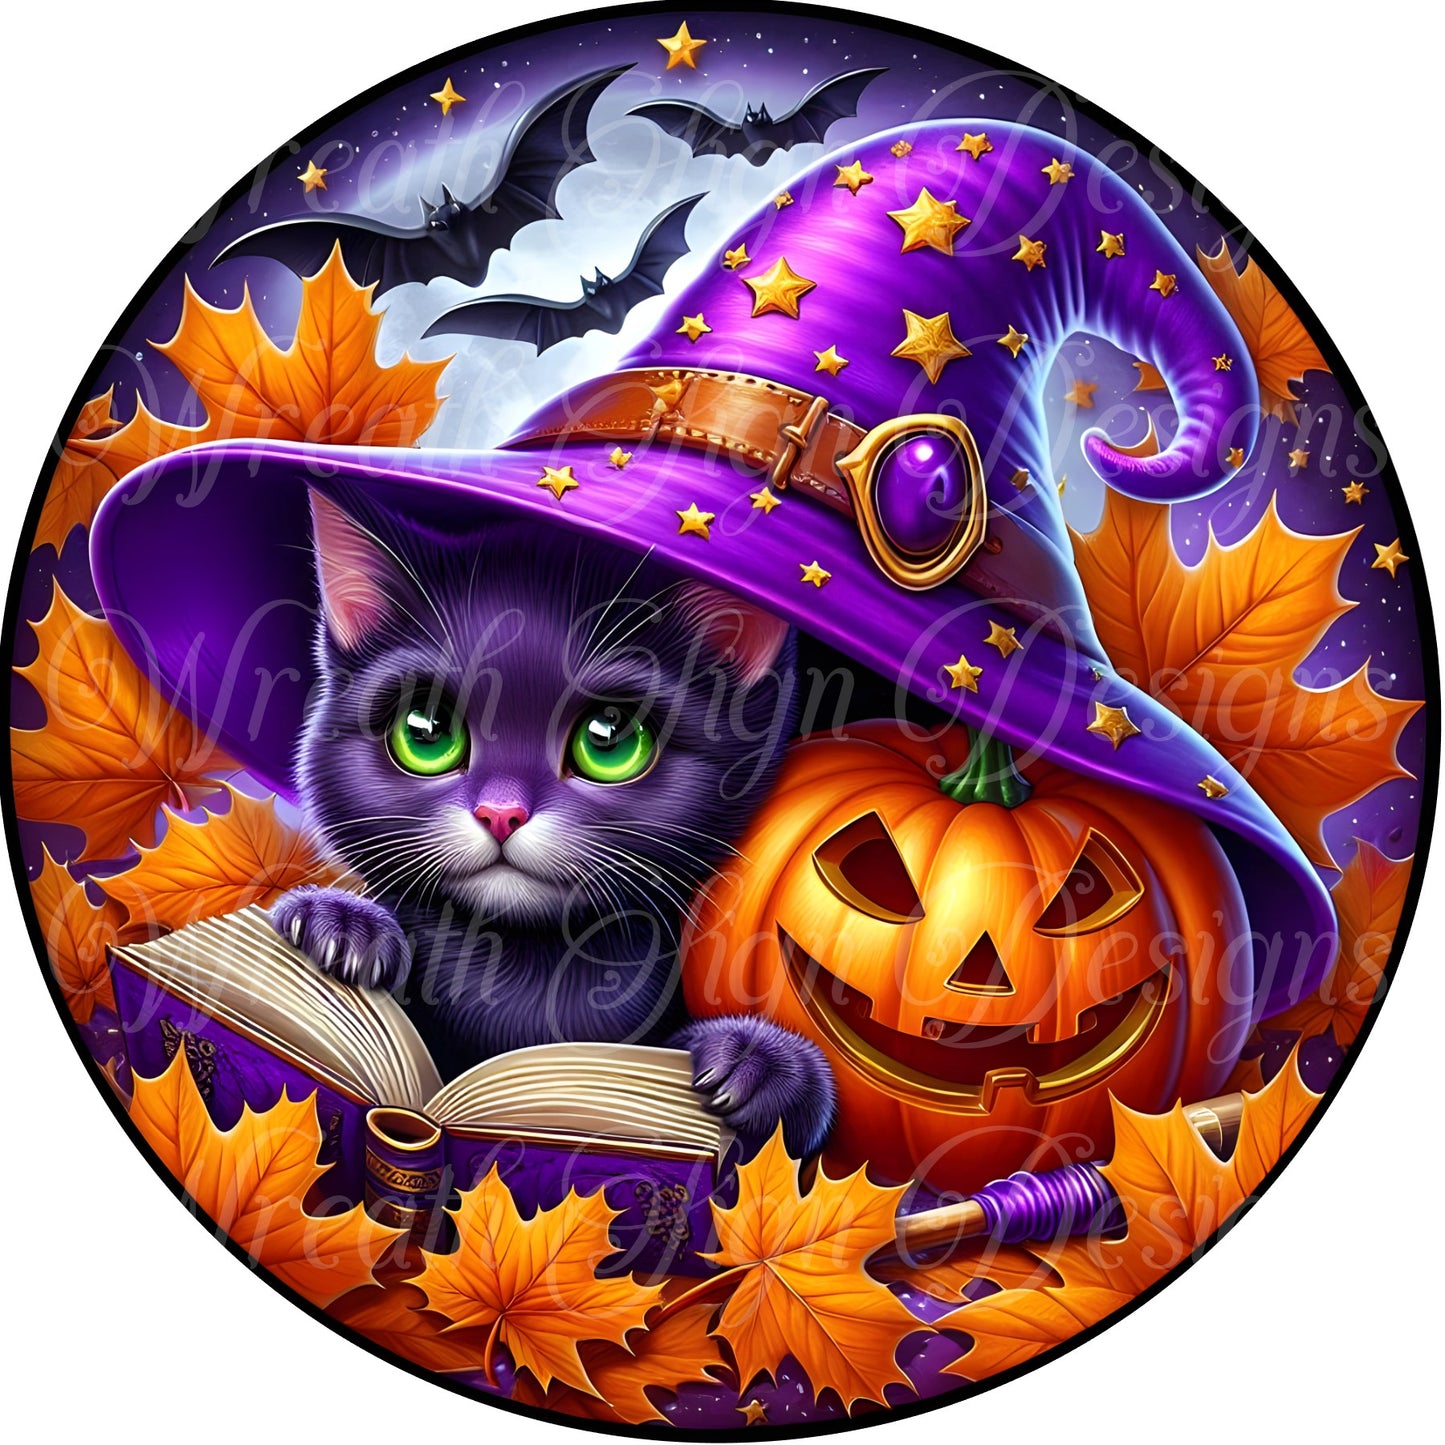 Black witch cat round metal sign, Halloween cat wreath sign, black and purple wreath center, wreath attachment, Wizzard Cat and spell book